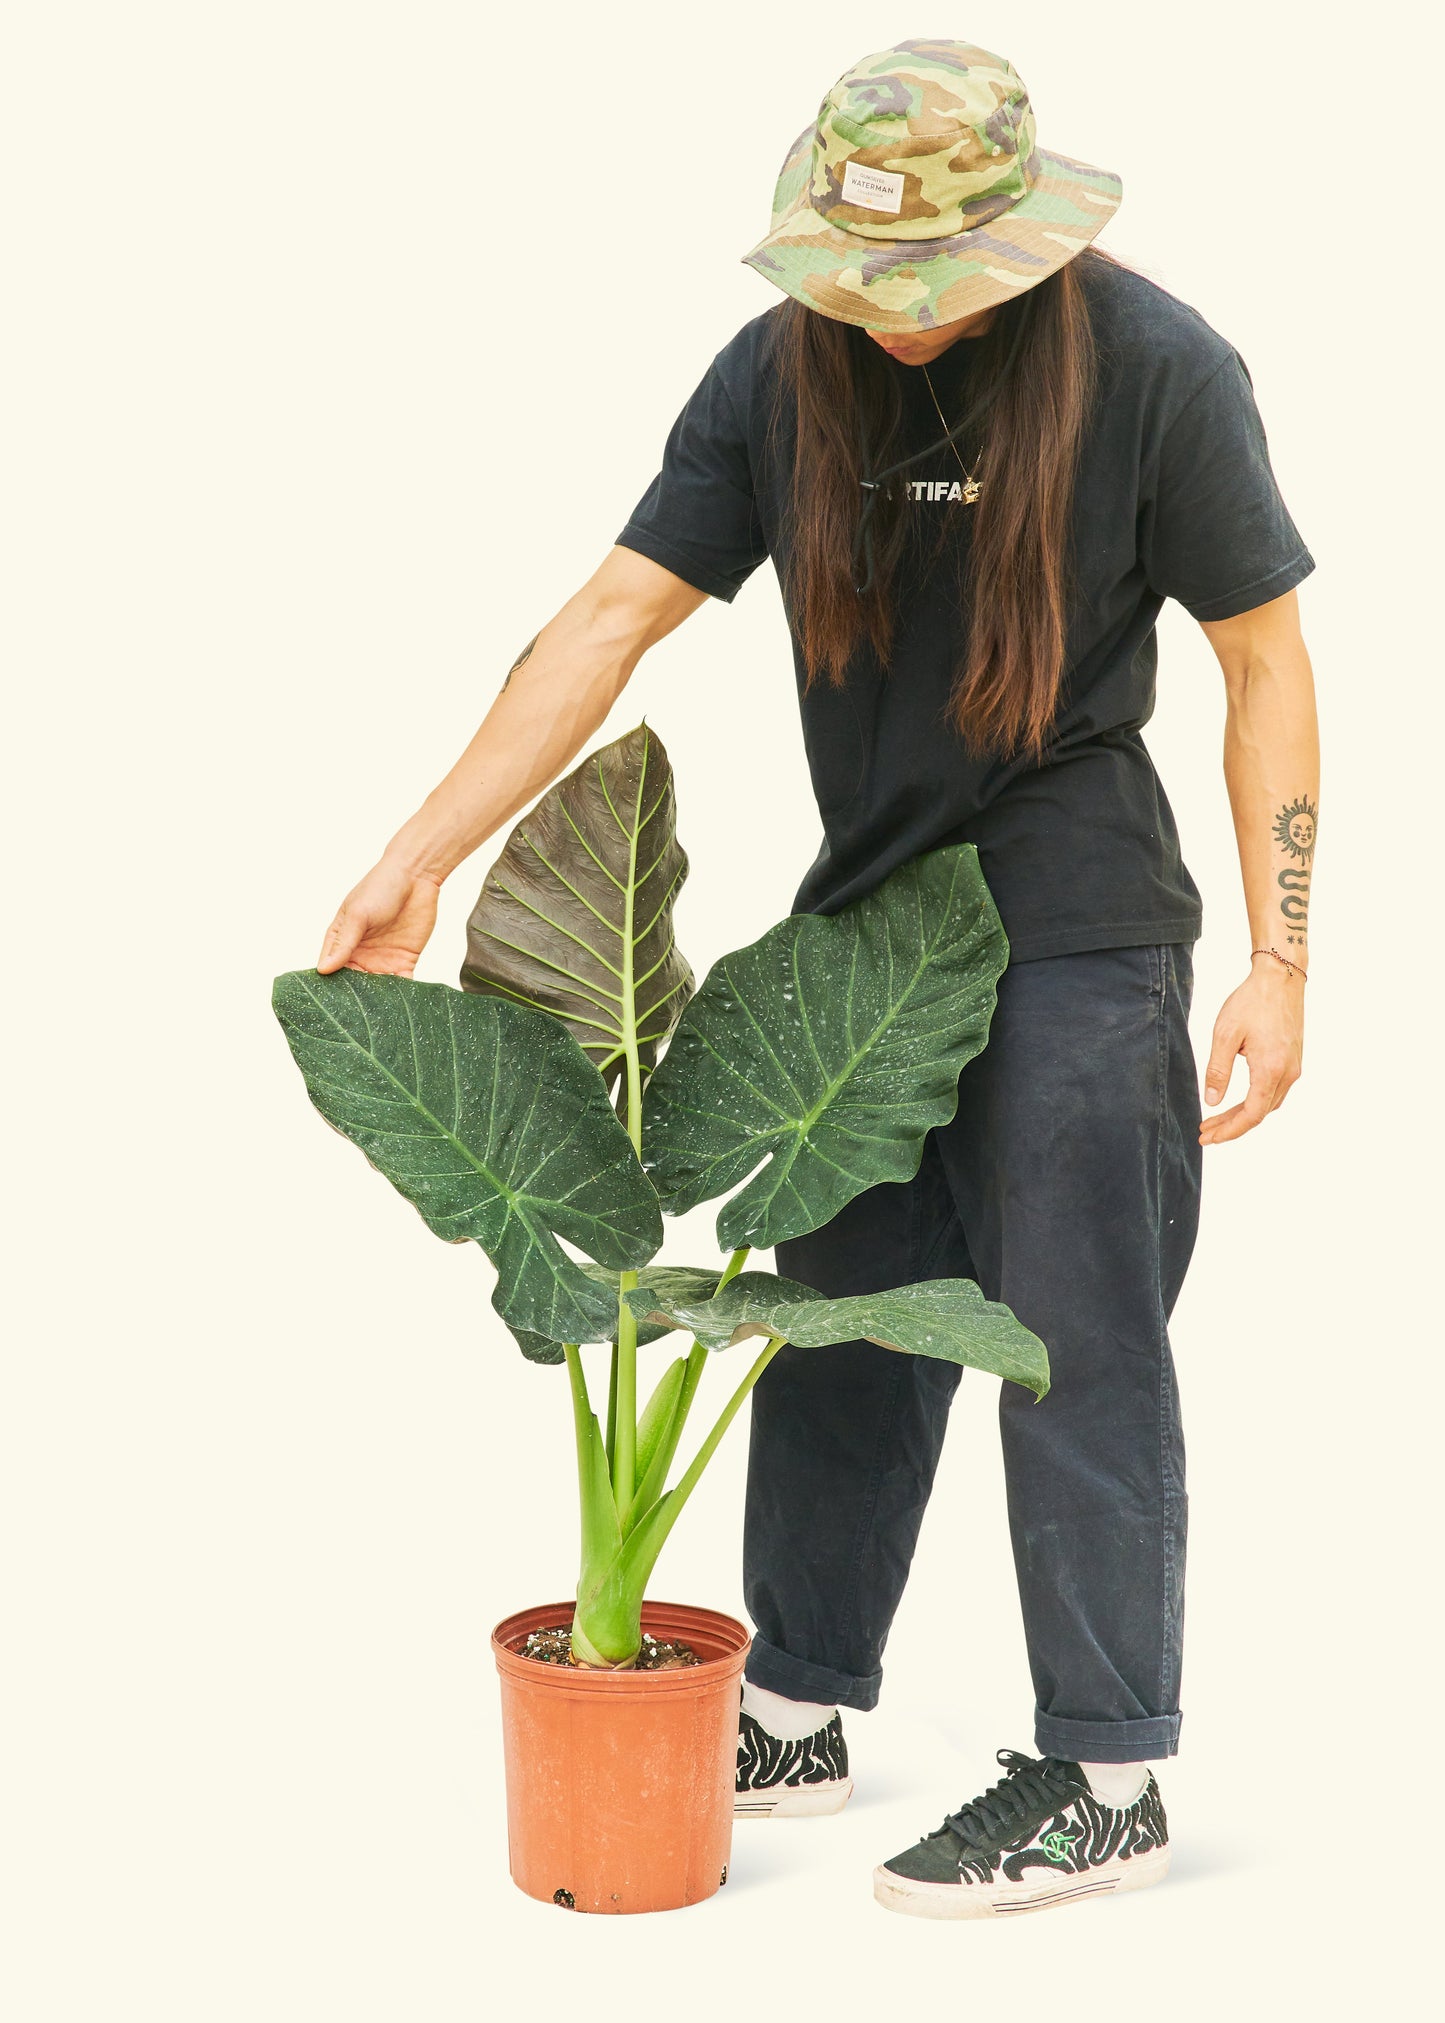 Large alocasia regalshield in a grow pot.